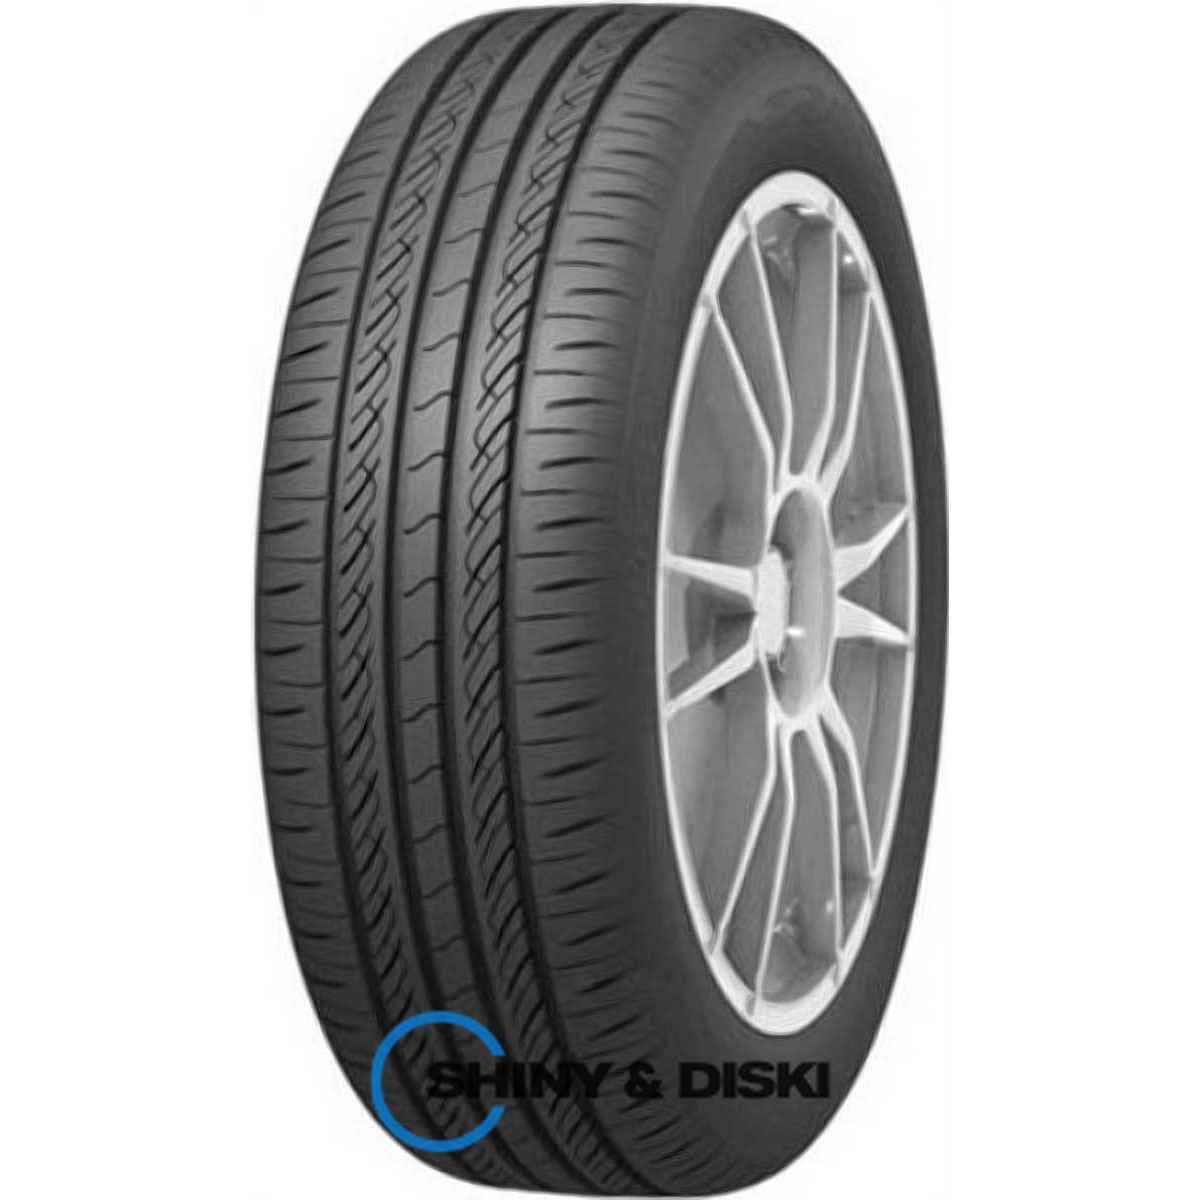 infinity ecosis 185/70 r14 88t